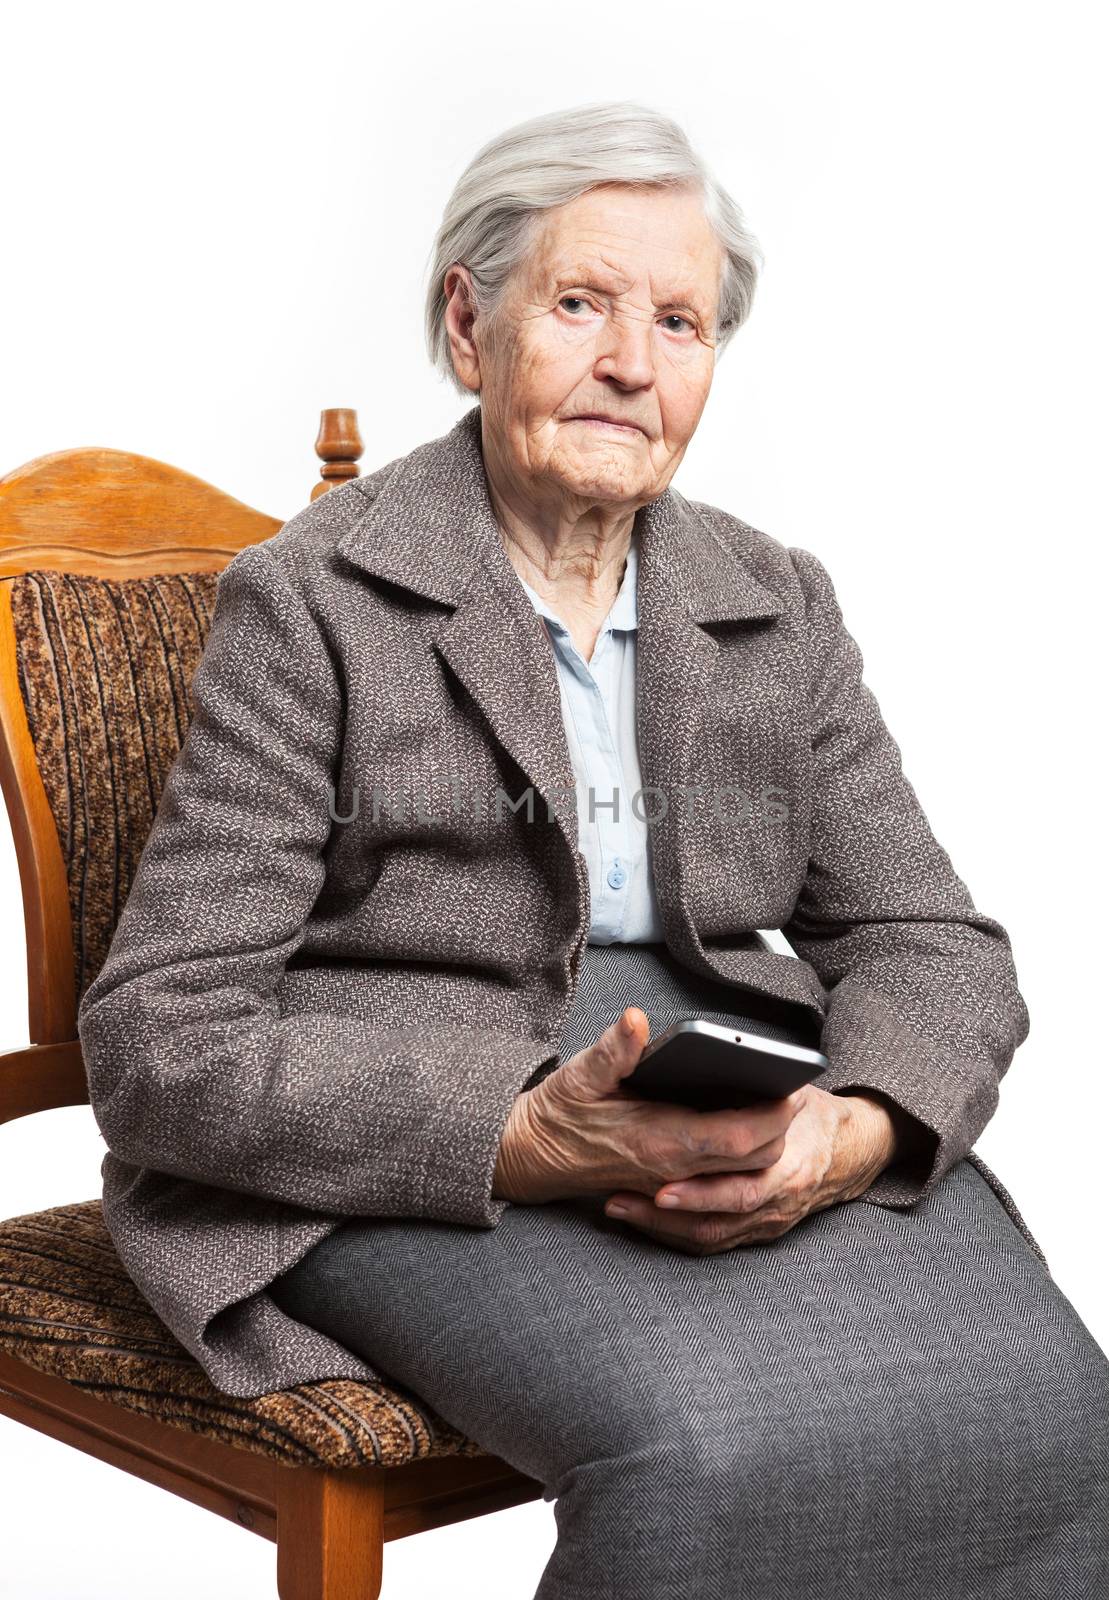 Senior woman sitting on chair and holding mobile phone